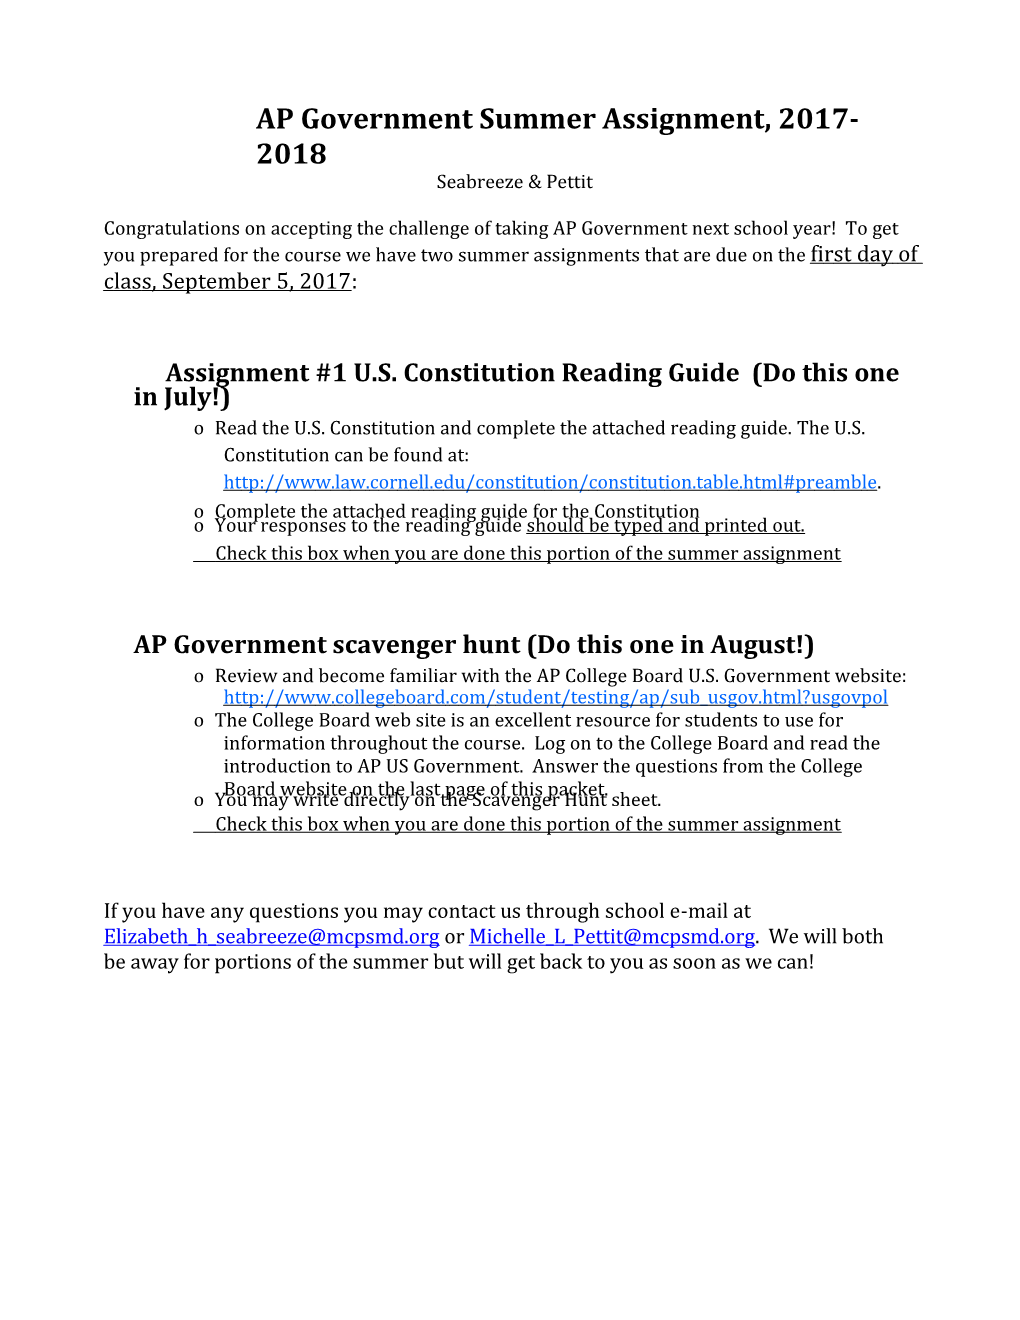 AP Government Summer Assignment, 2017-2018